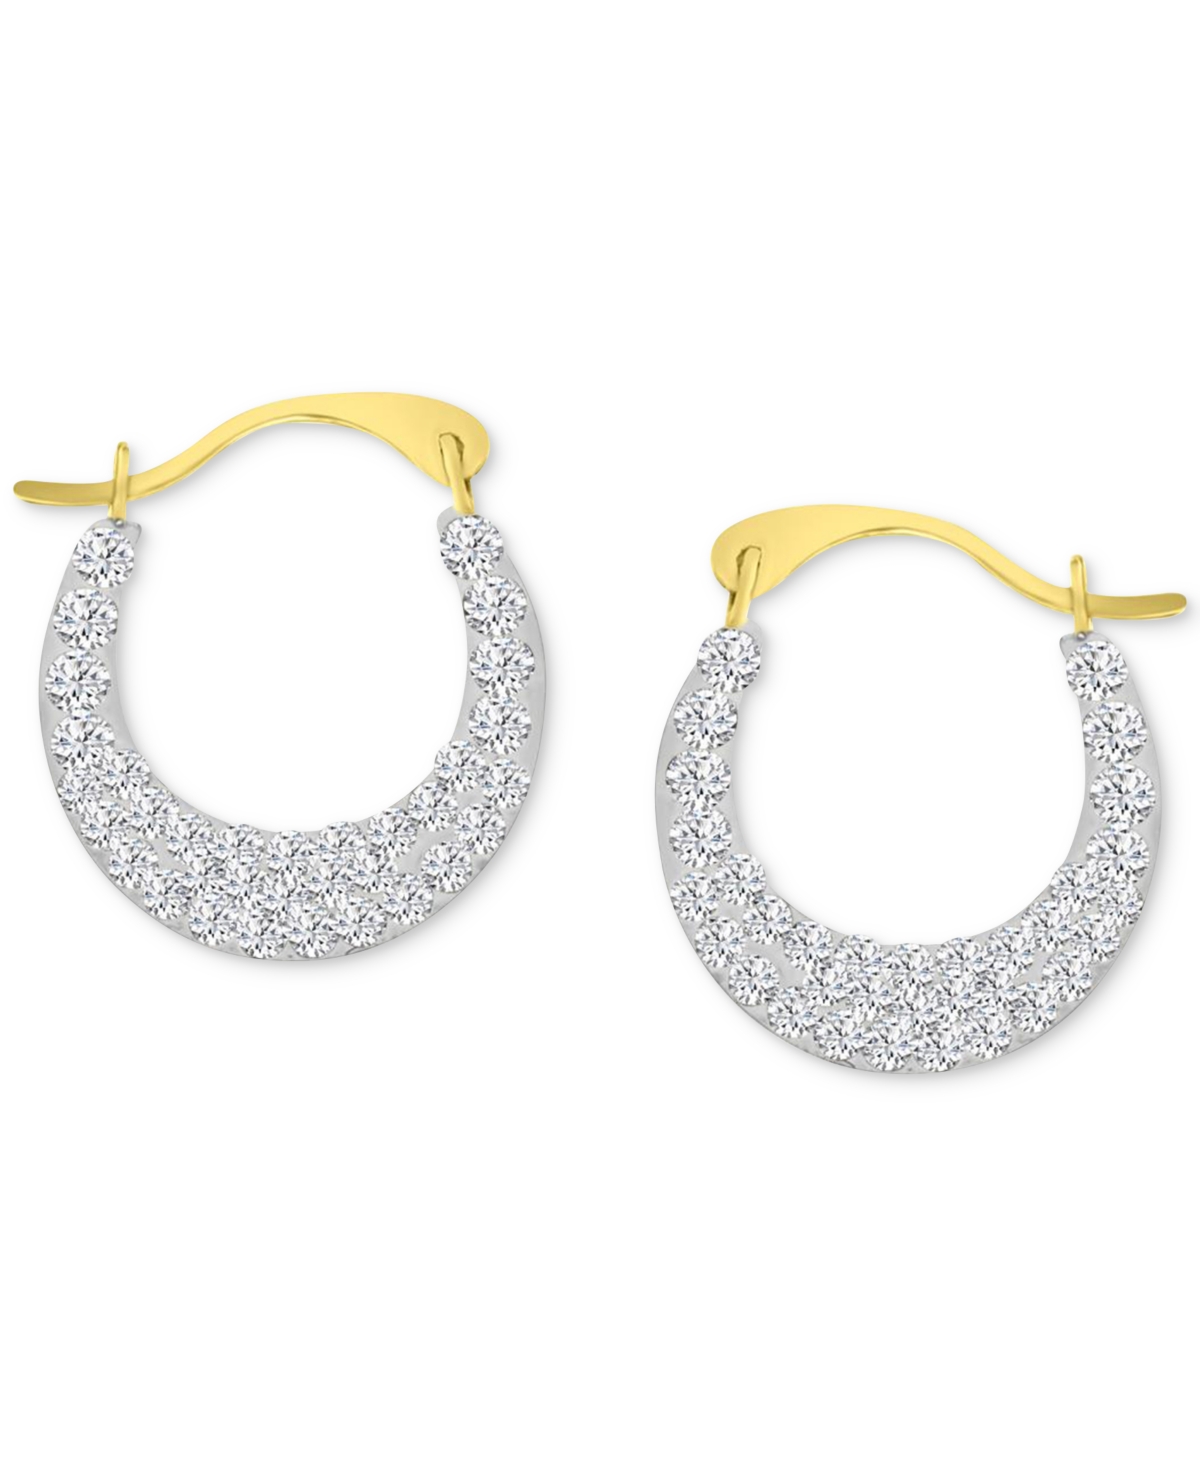 Crystal Pave Small Hoop Earrings in 10k Gold, 0.59" - Gold